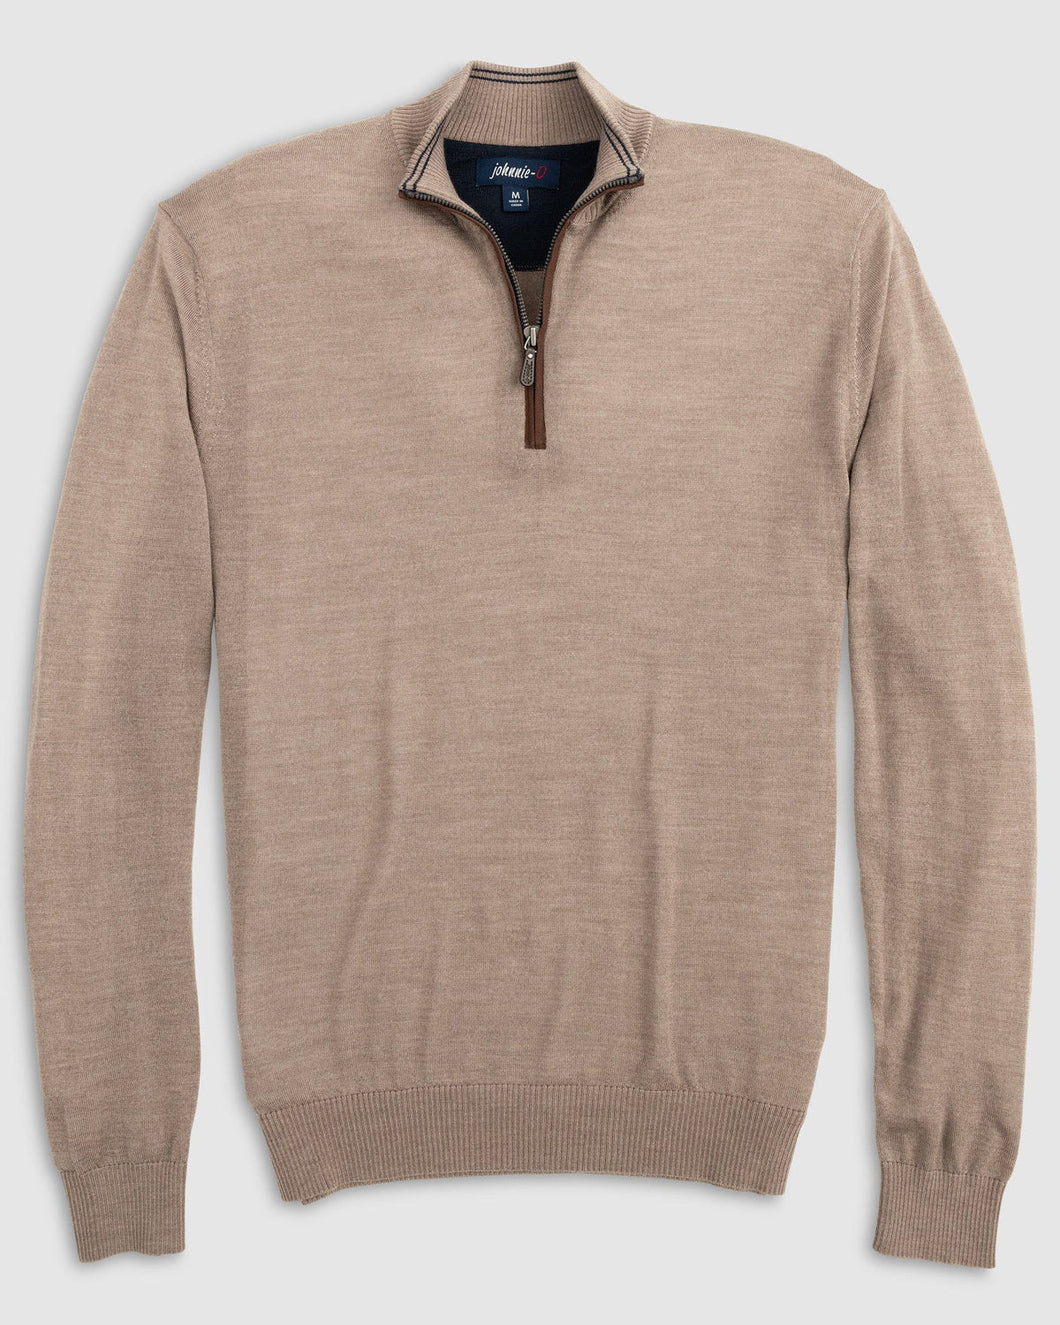 Johnnie-O Baron Wool Quarter-Zip Pullover in Oatmeal